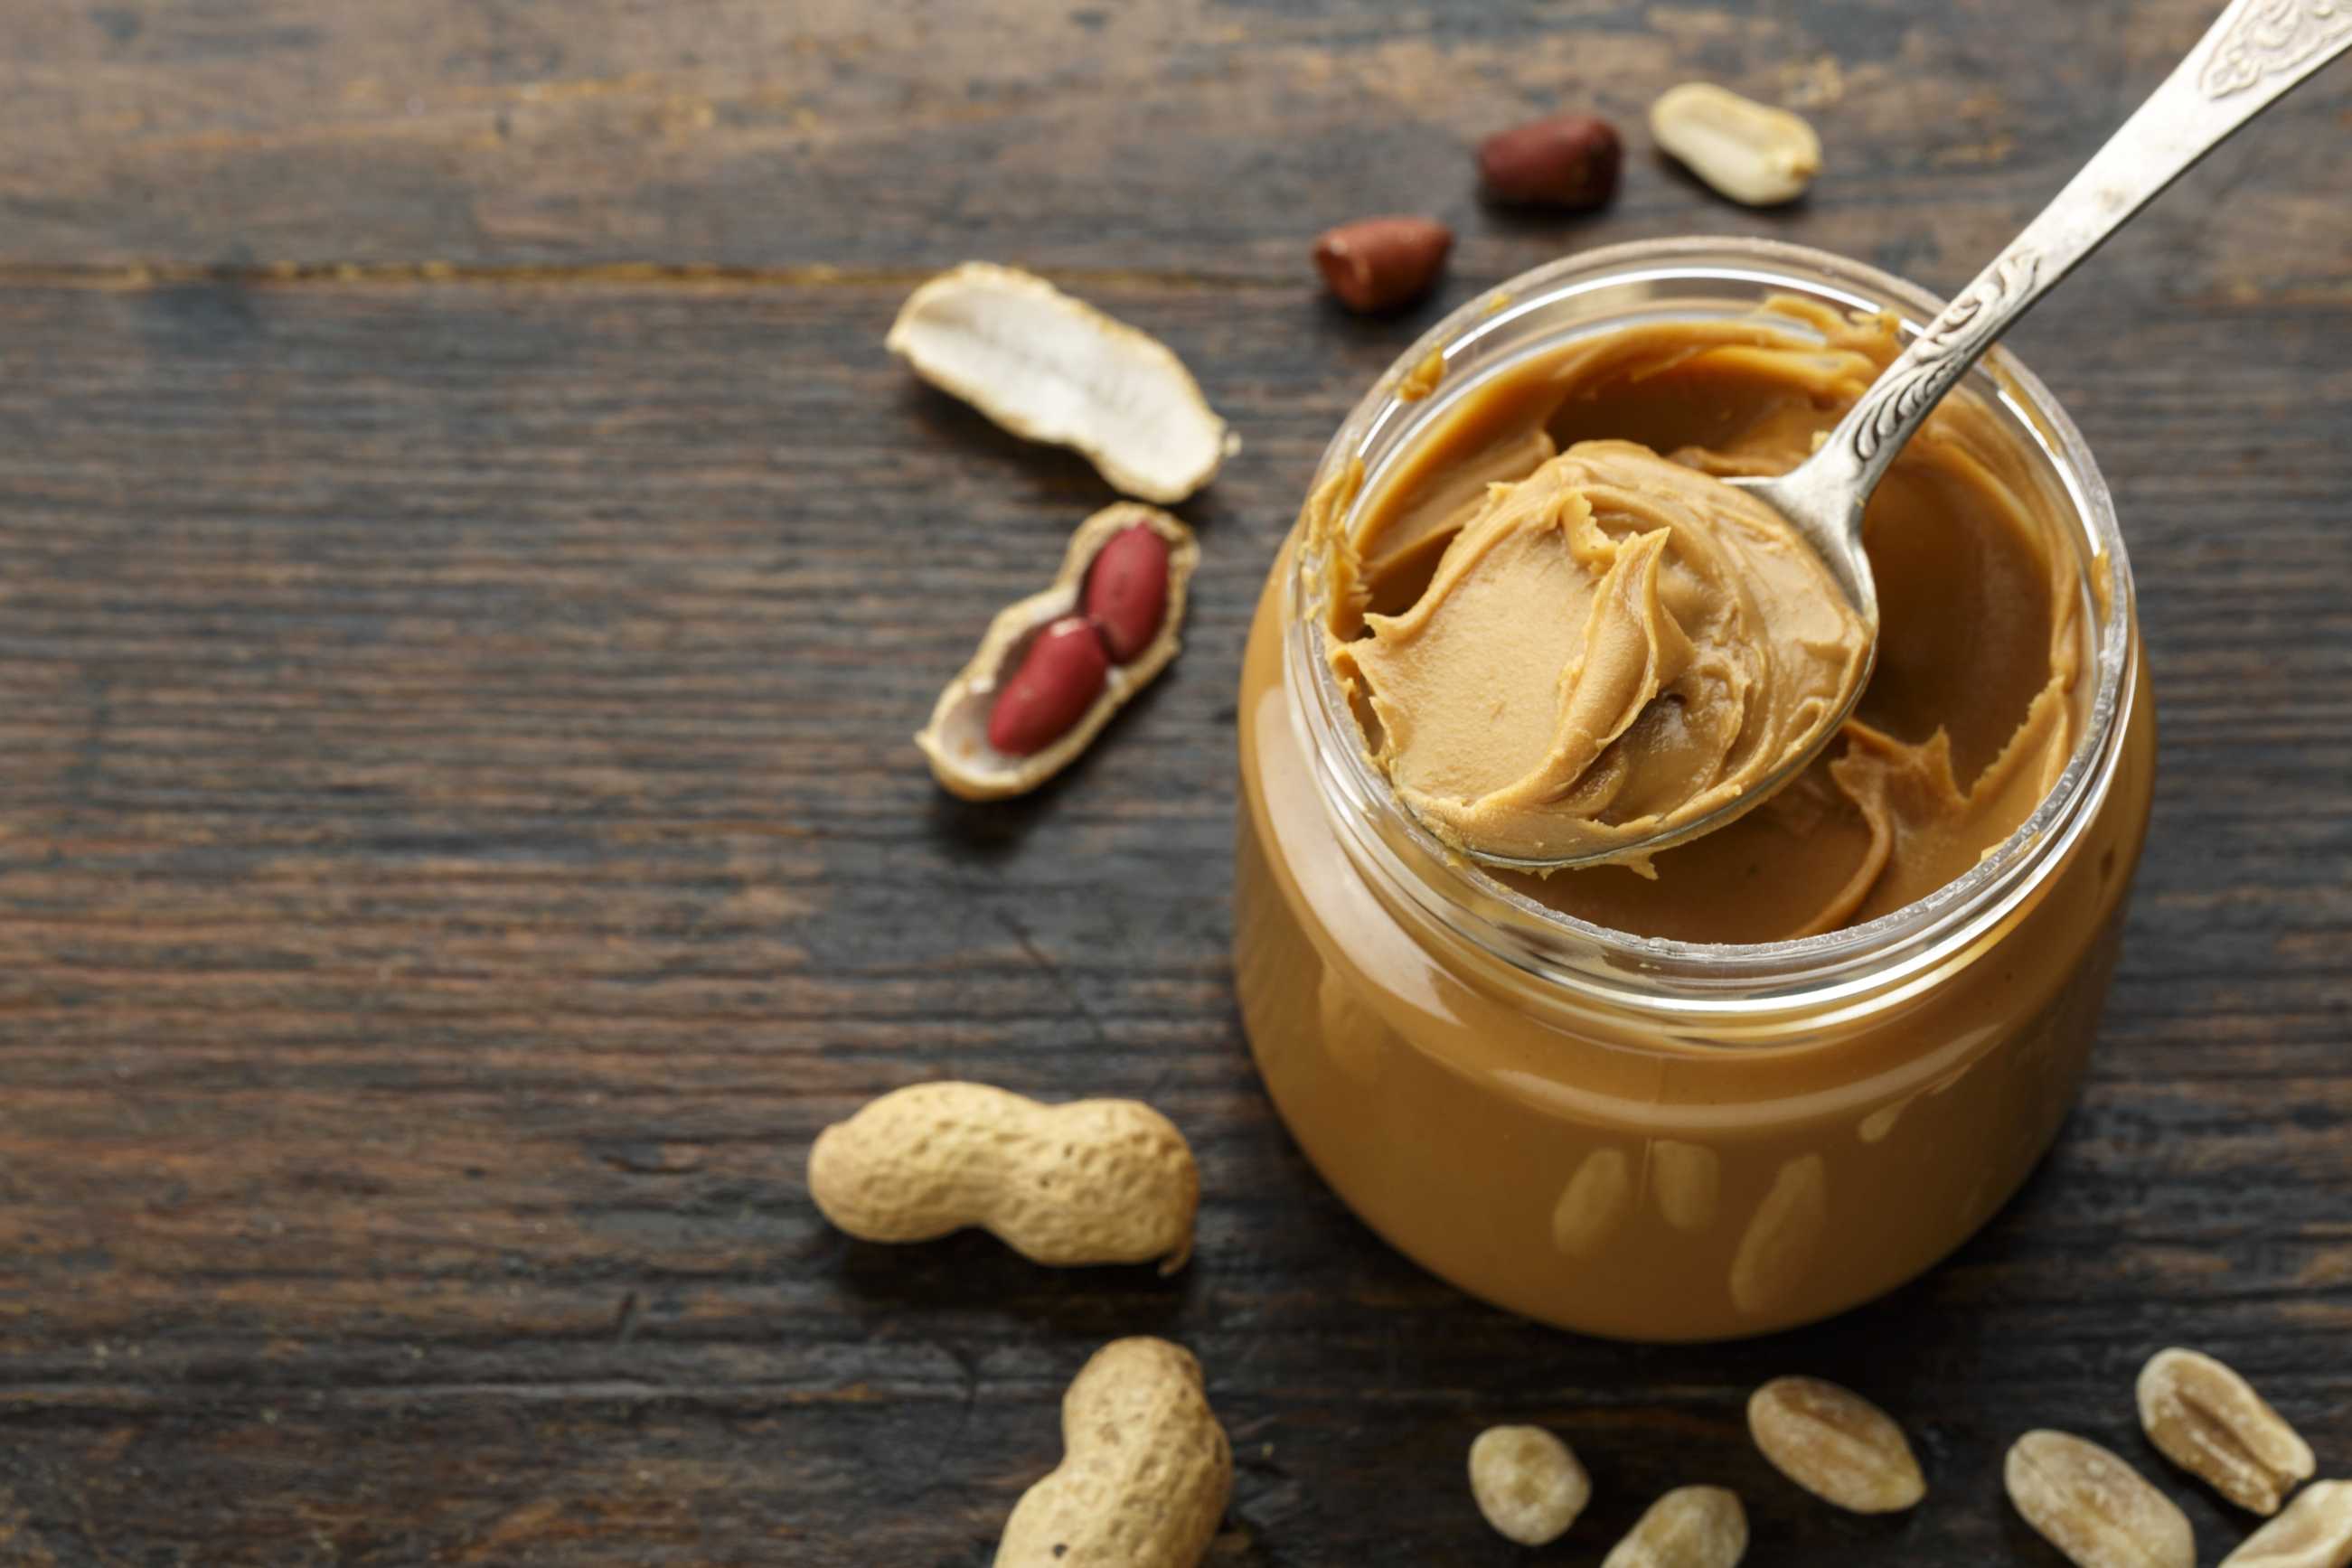 microsoft, how nutrition professionals rate peanut butter: serving sizes, health risks, and more